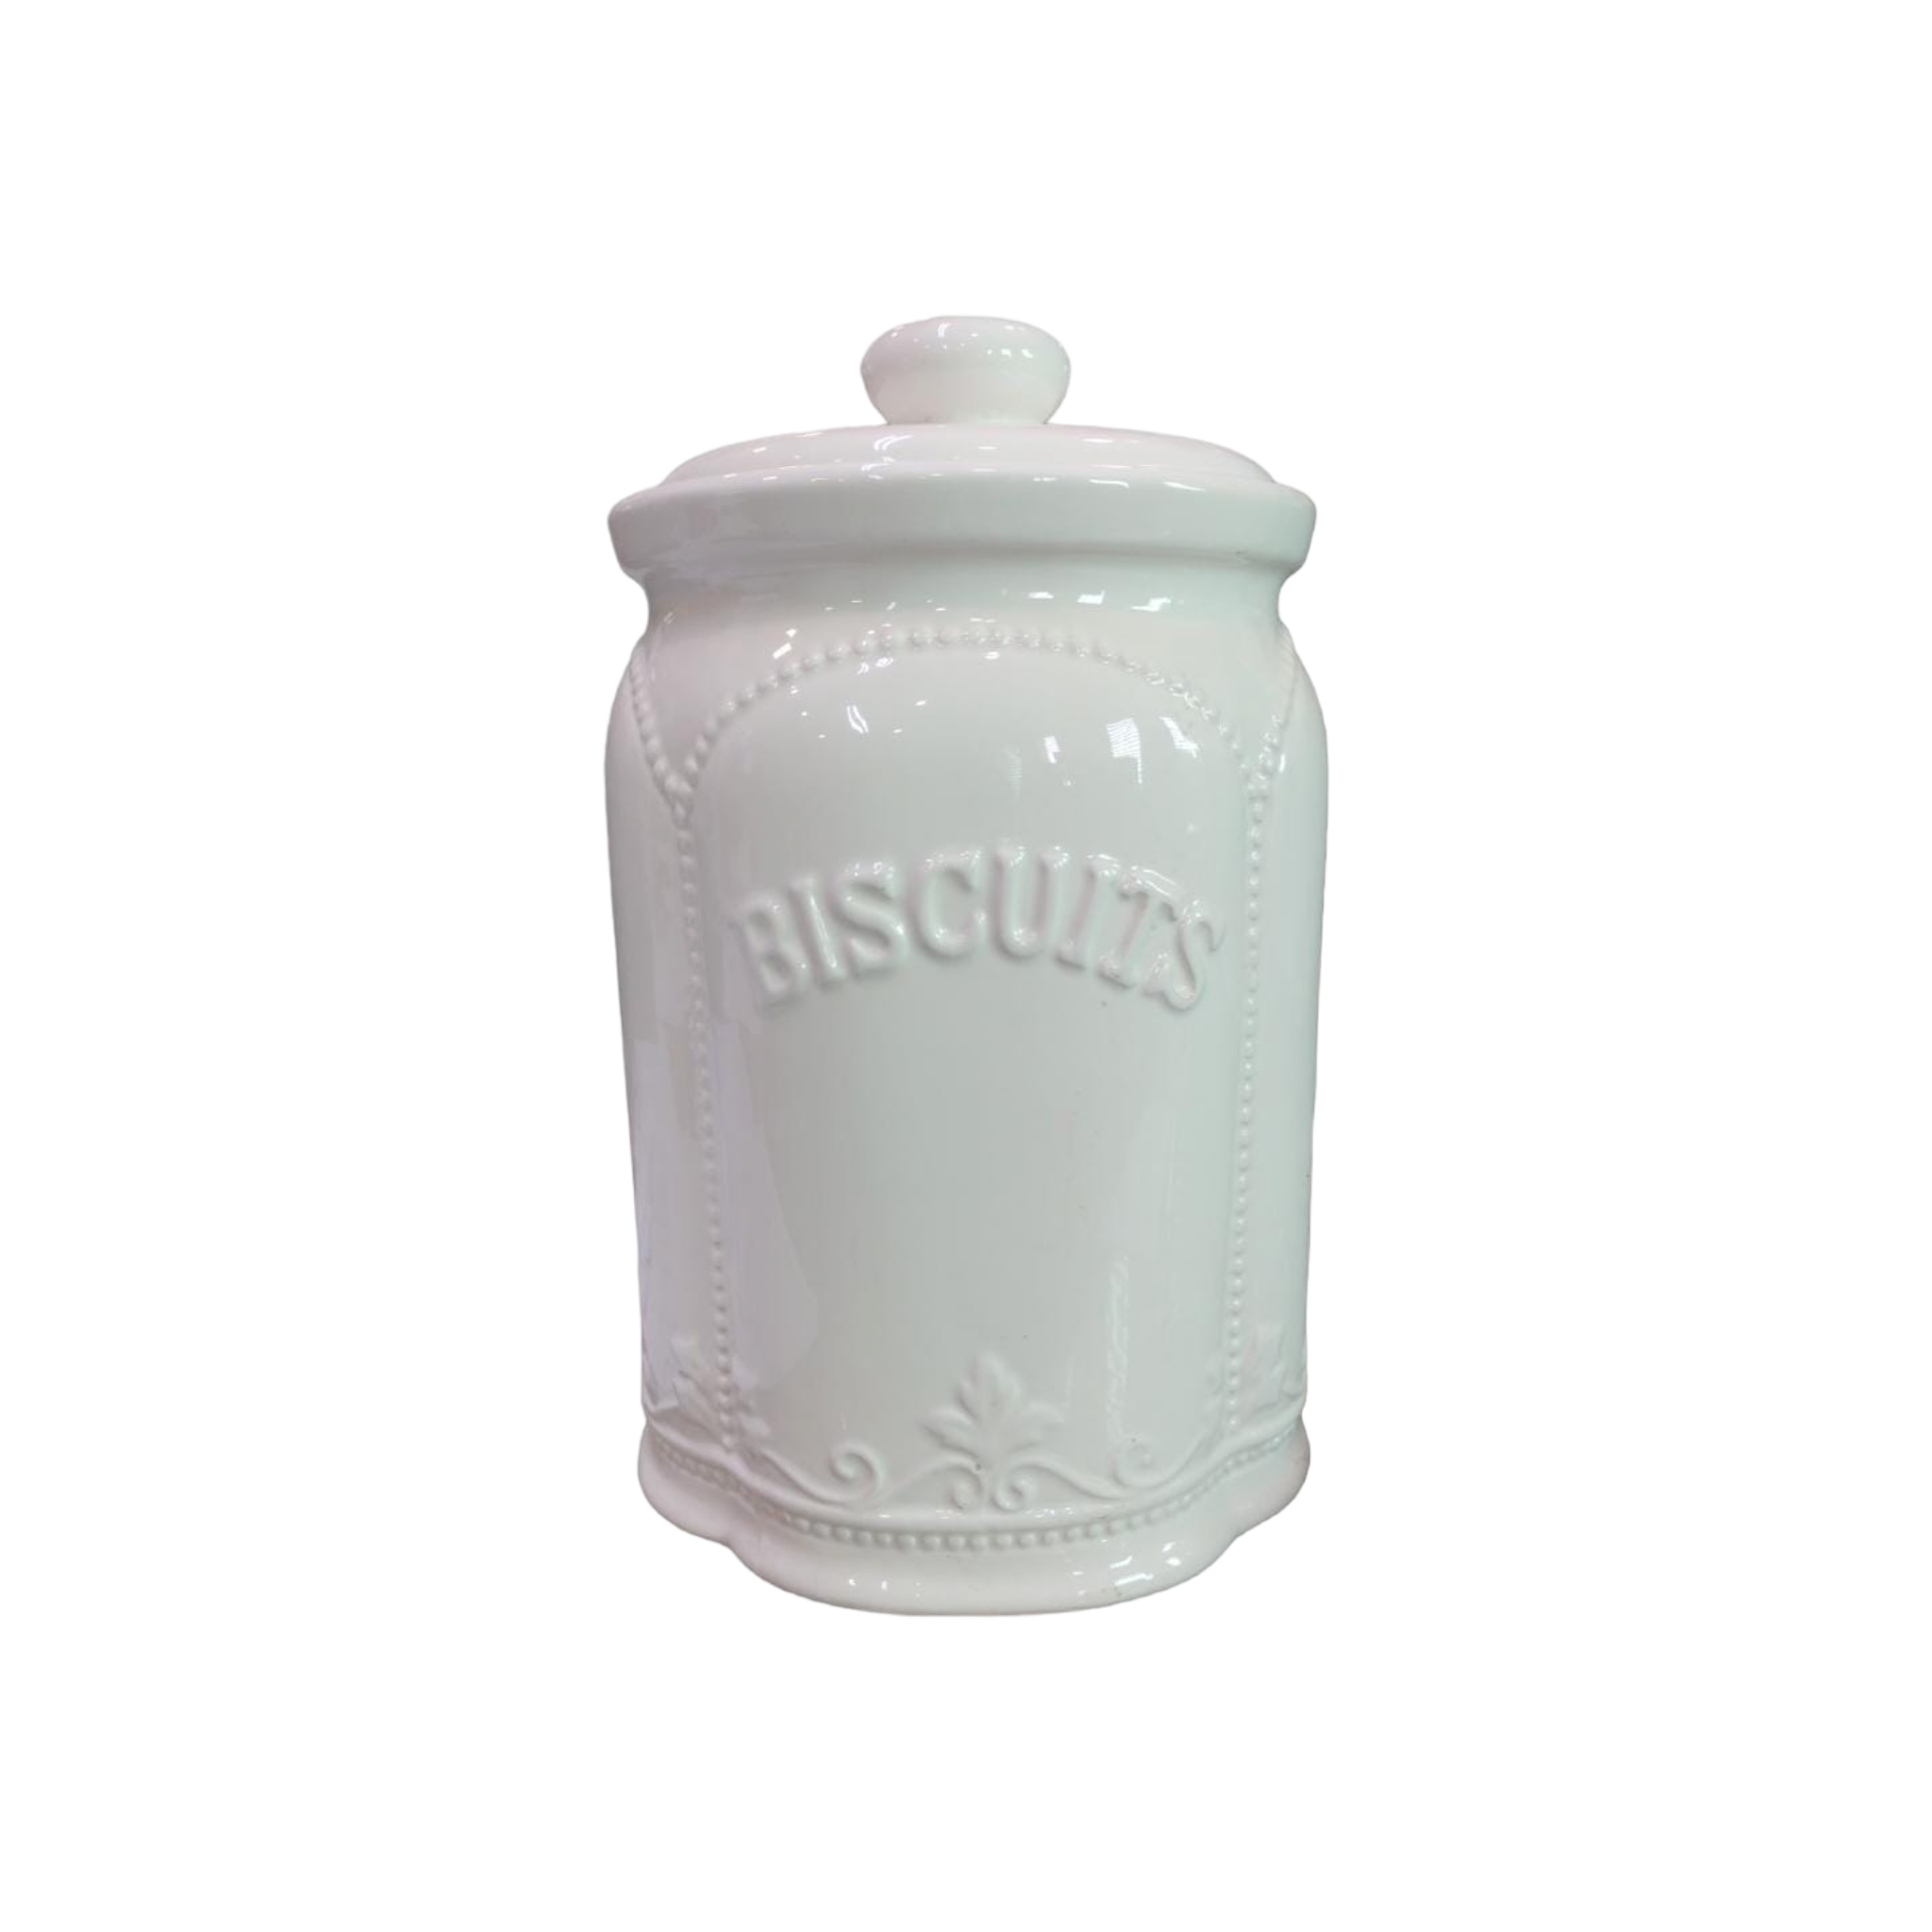 Vintage Ceramic Biscuit Canister with Lid